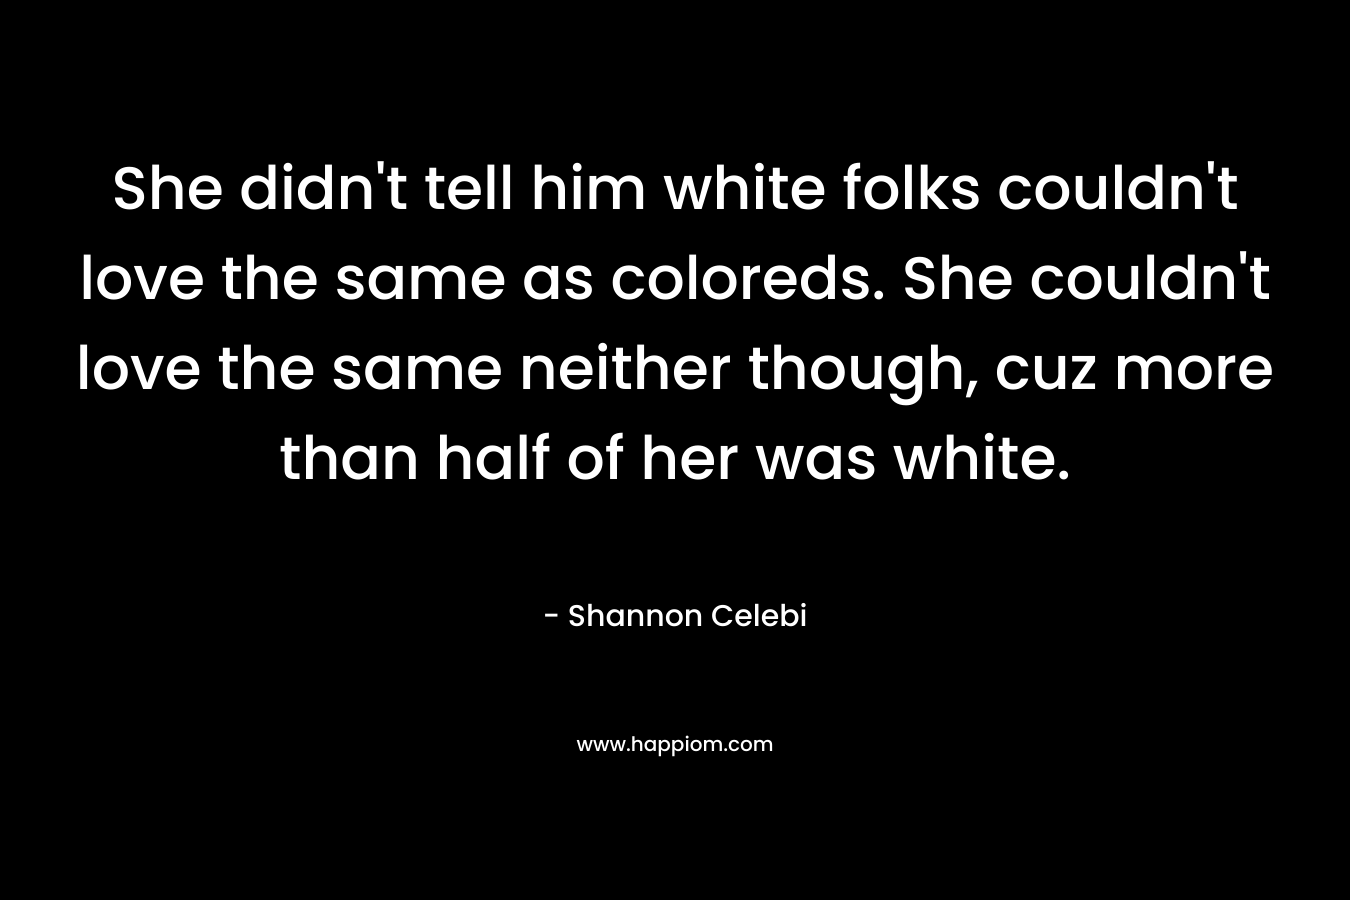 She didn’t tell him white folks couldn’t love the same as coloreds. She couldn’t love the same neither though, cuz more than half of her was white. – Shannon Celebi